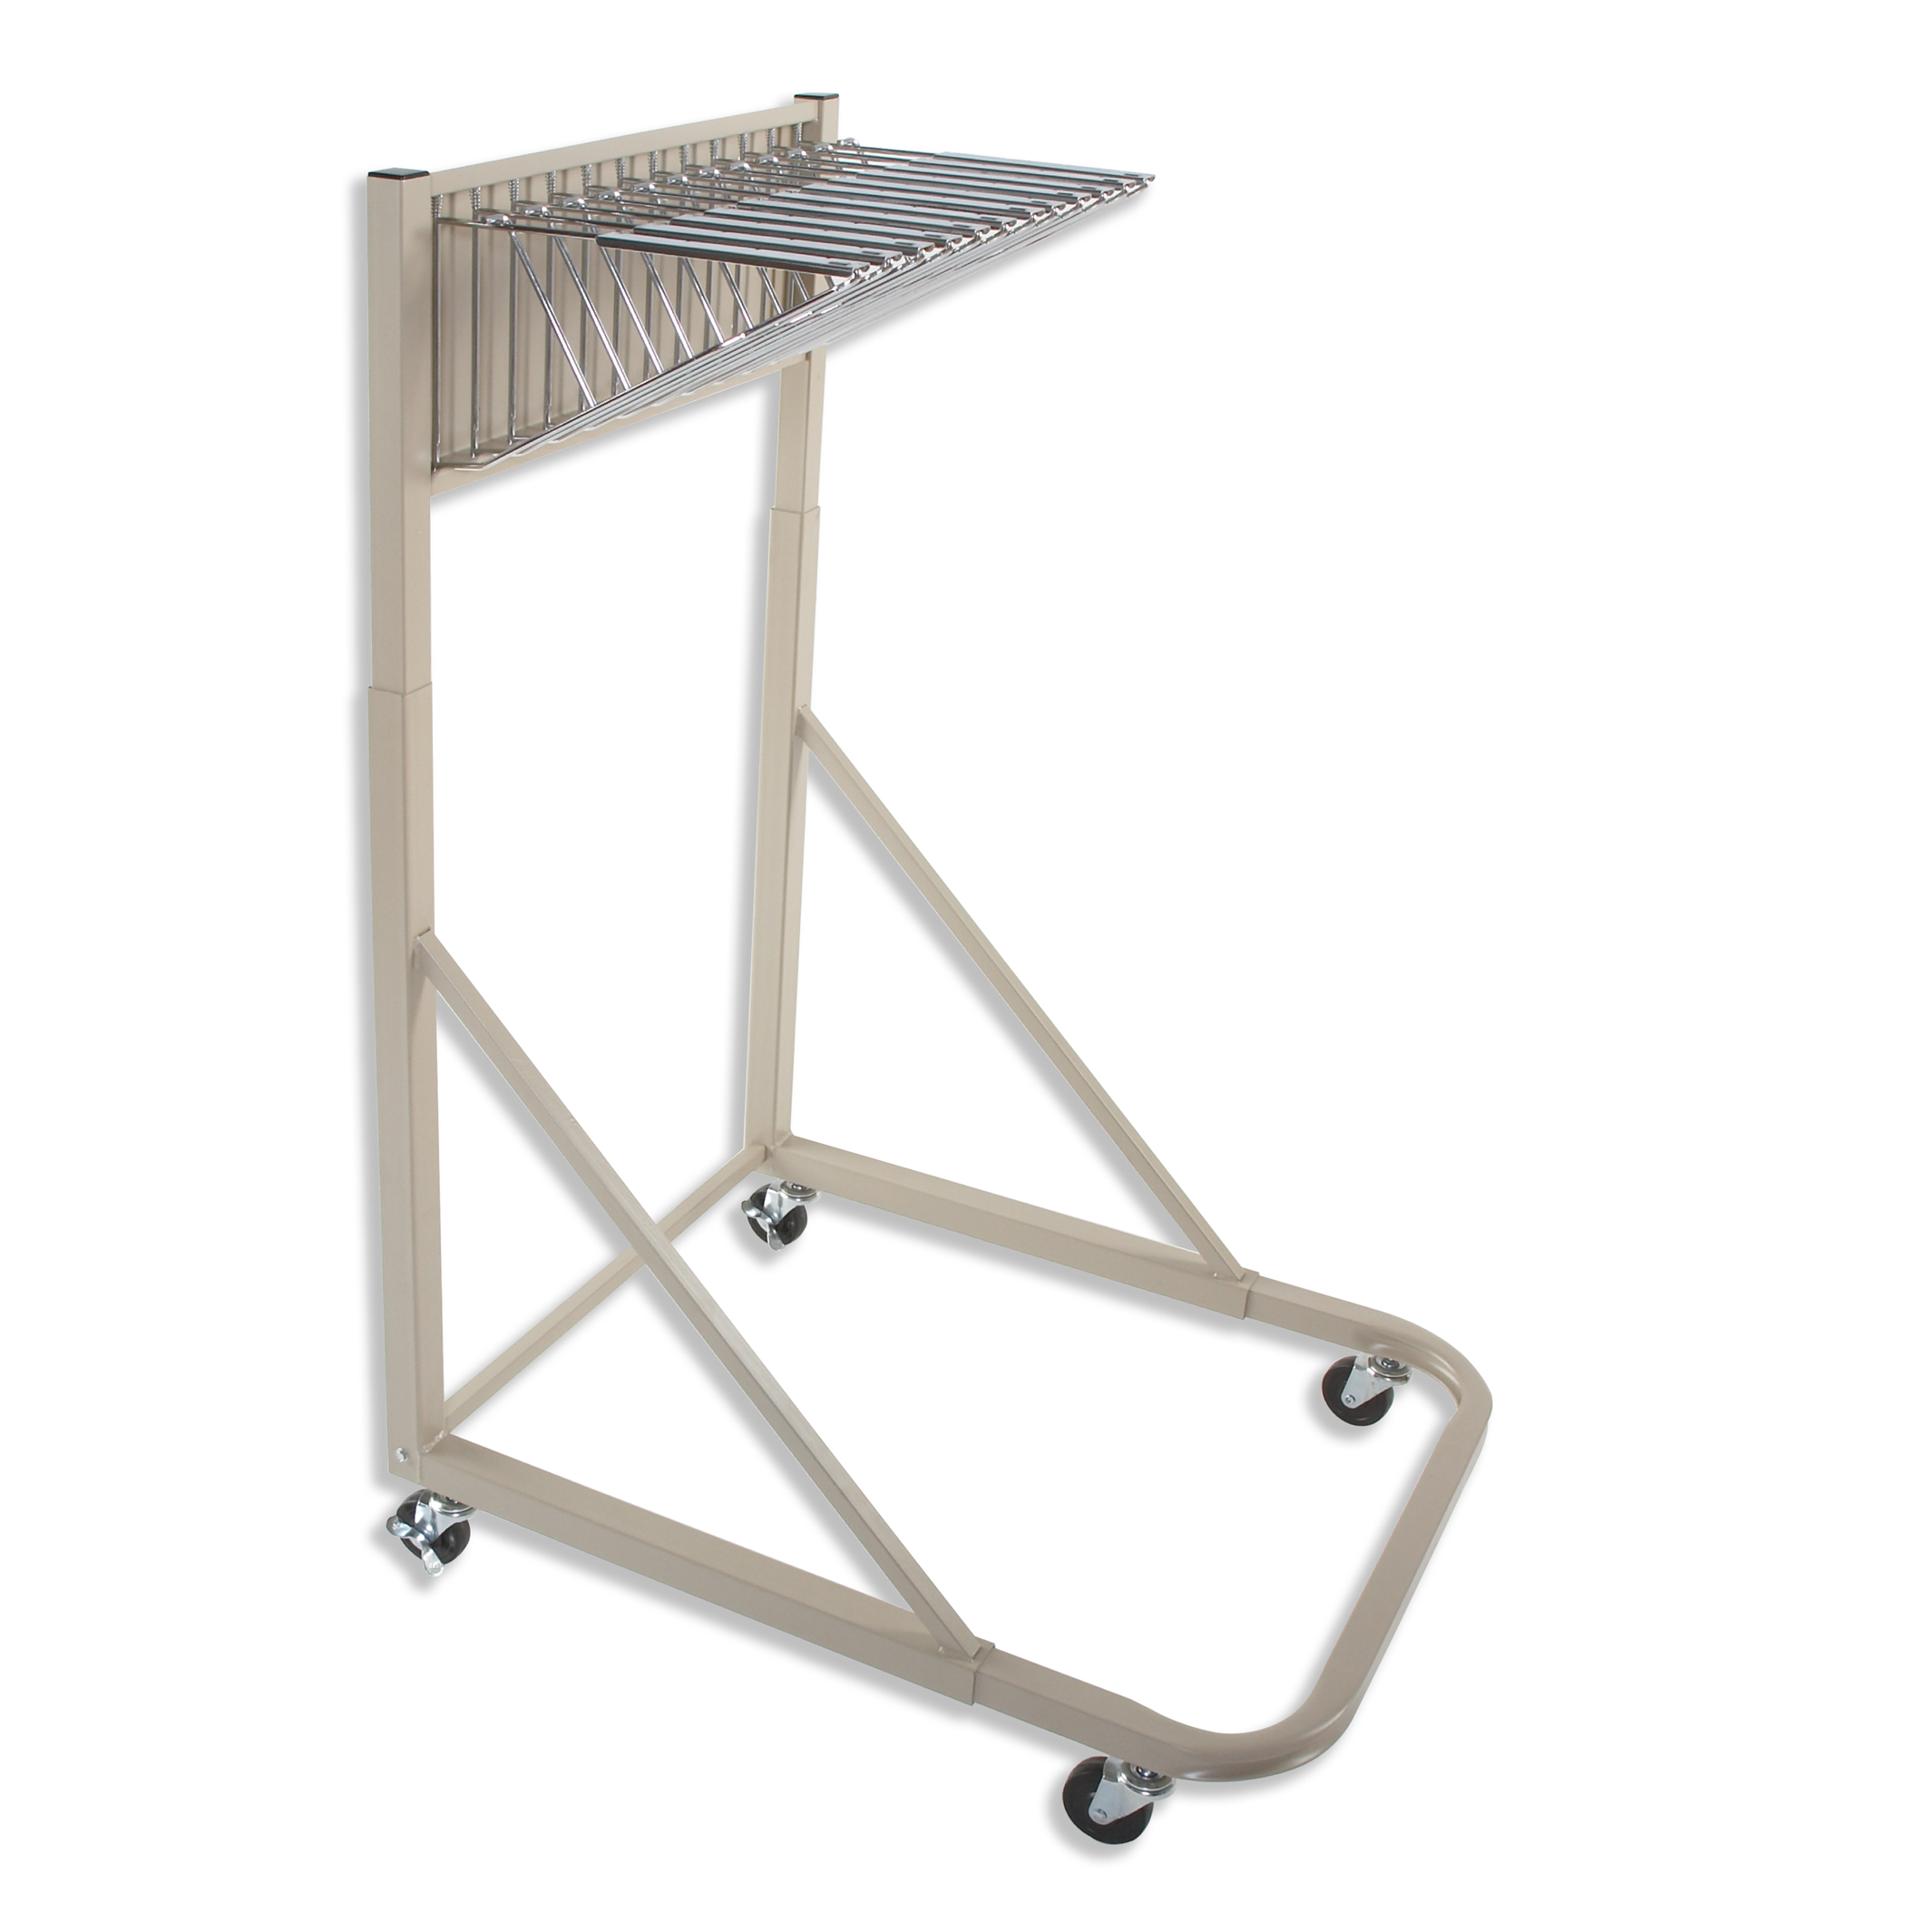 Brookside Design Vertical File Systems, MRWH Mobile Stand with 12 Pivot Hangers